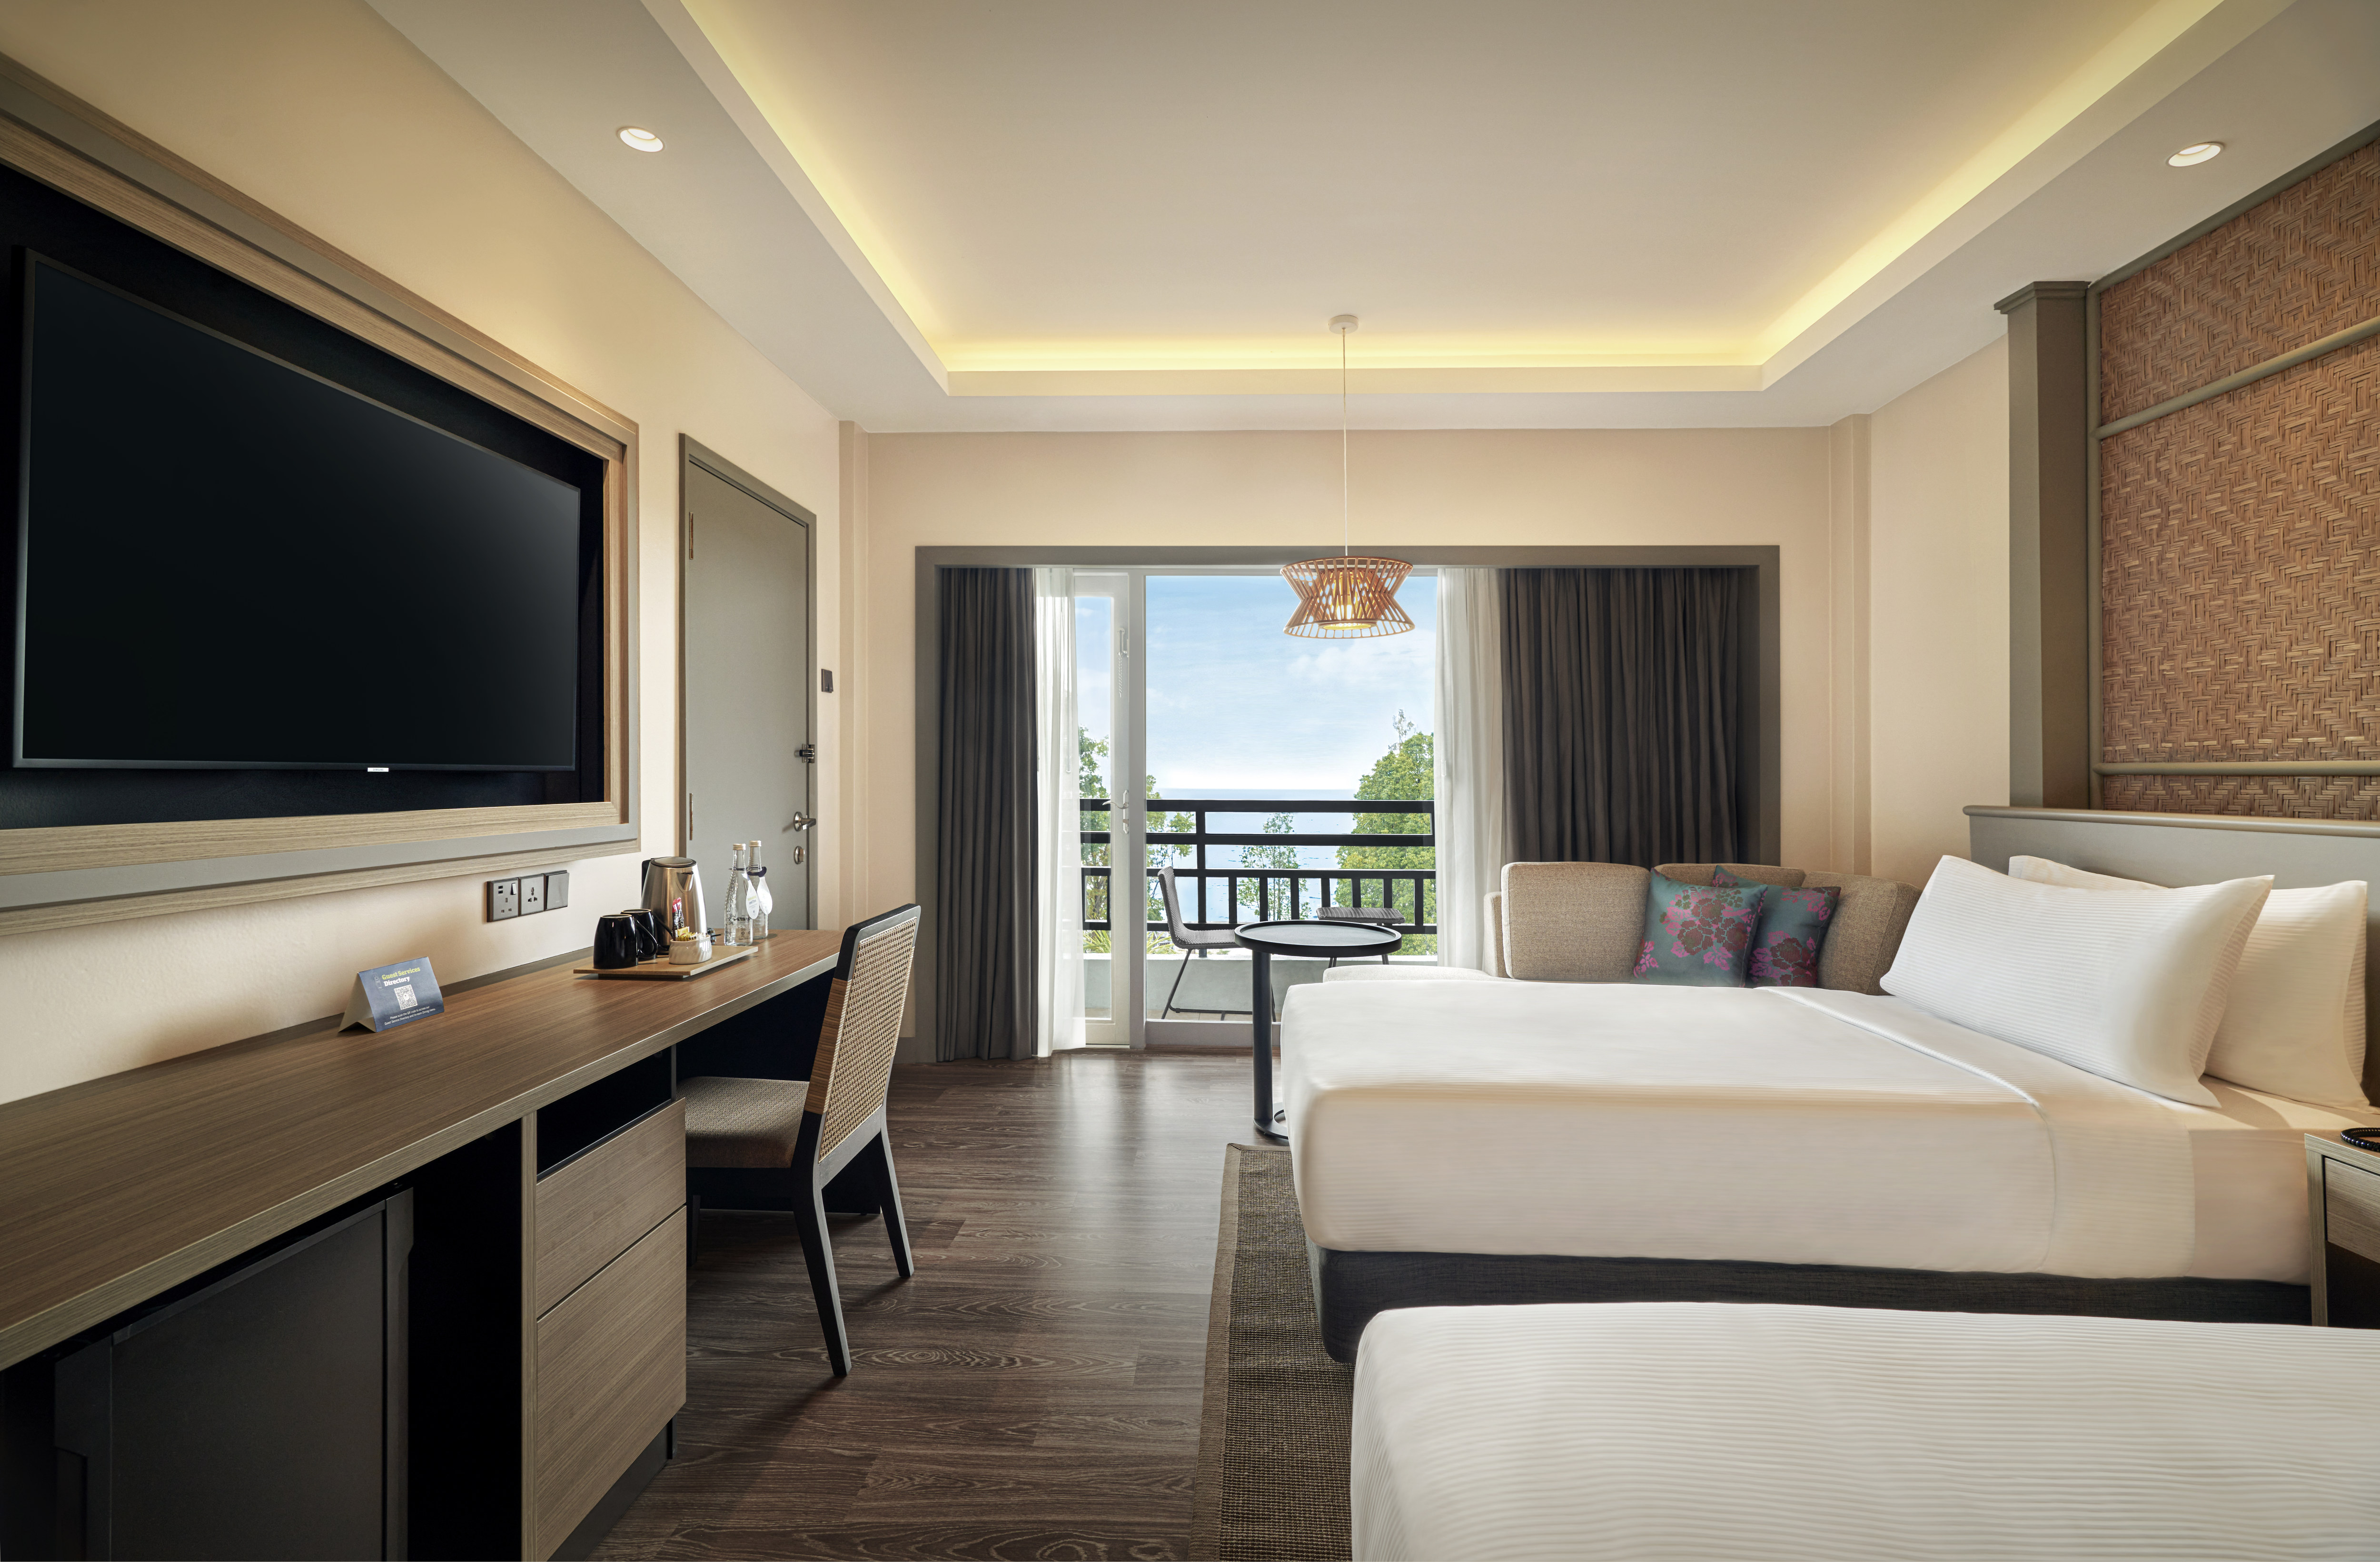 Twin beds room with balcony, sea view and wall mounted TV